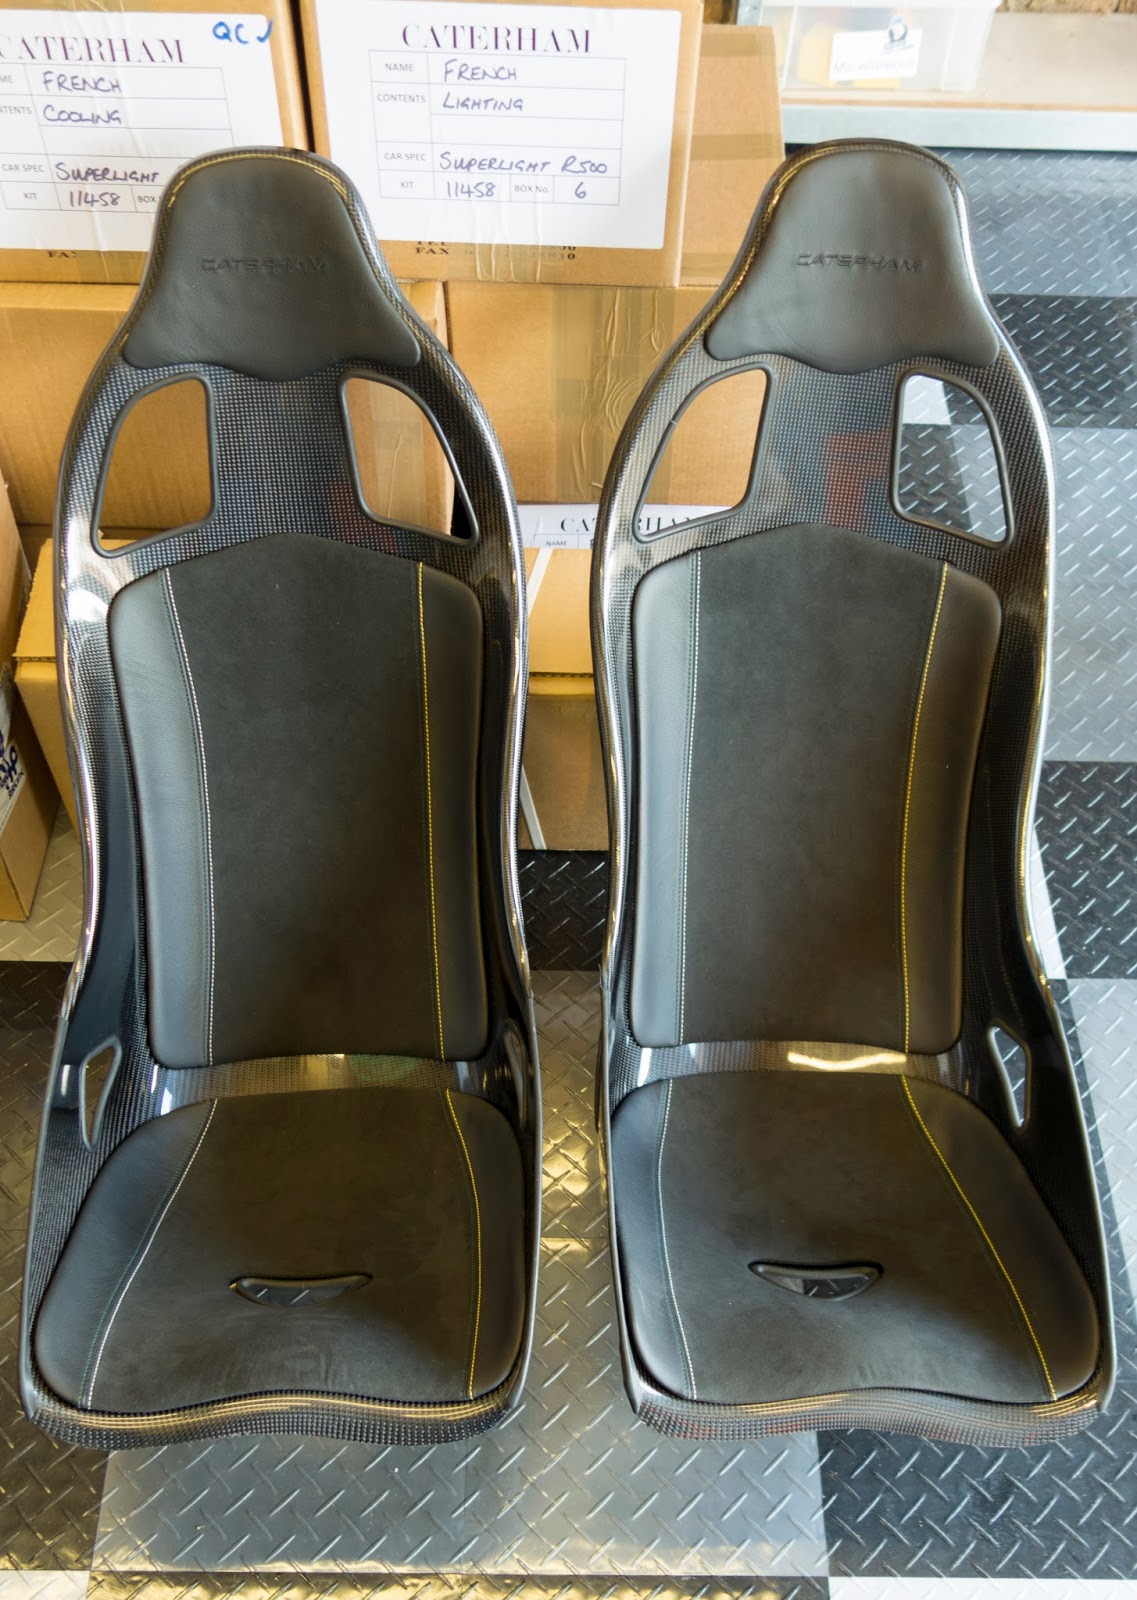 620R seats were delivered, then collected within four hours of delivery as they were 'pre-production' prototypes.